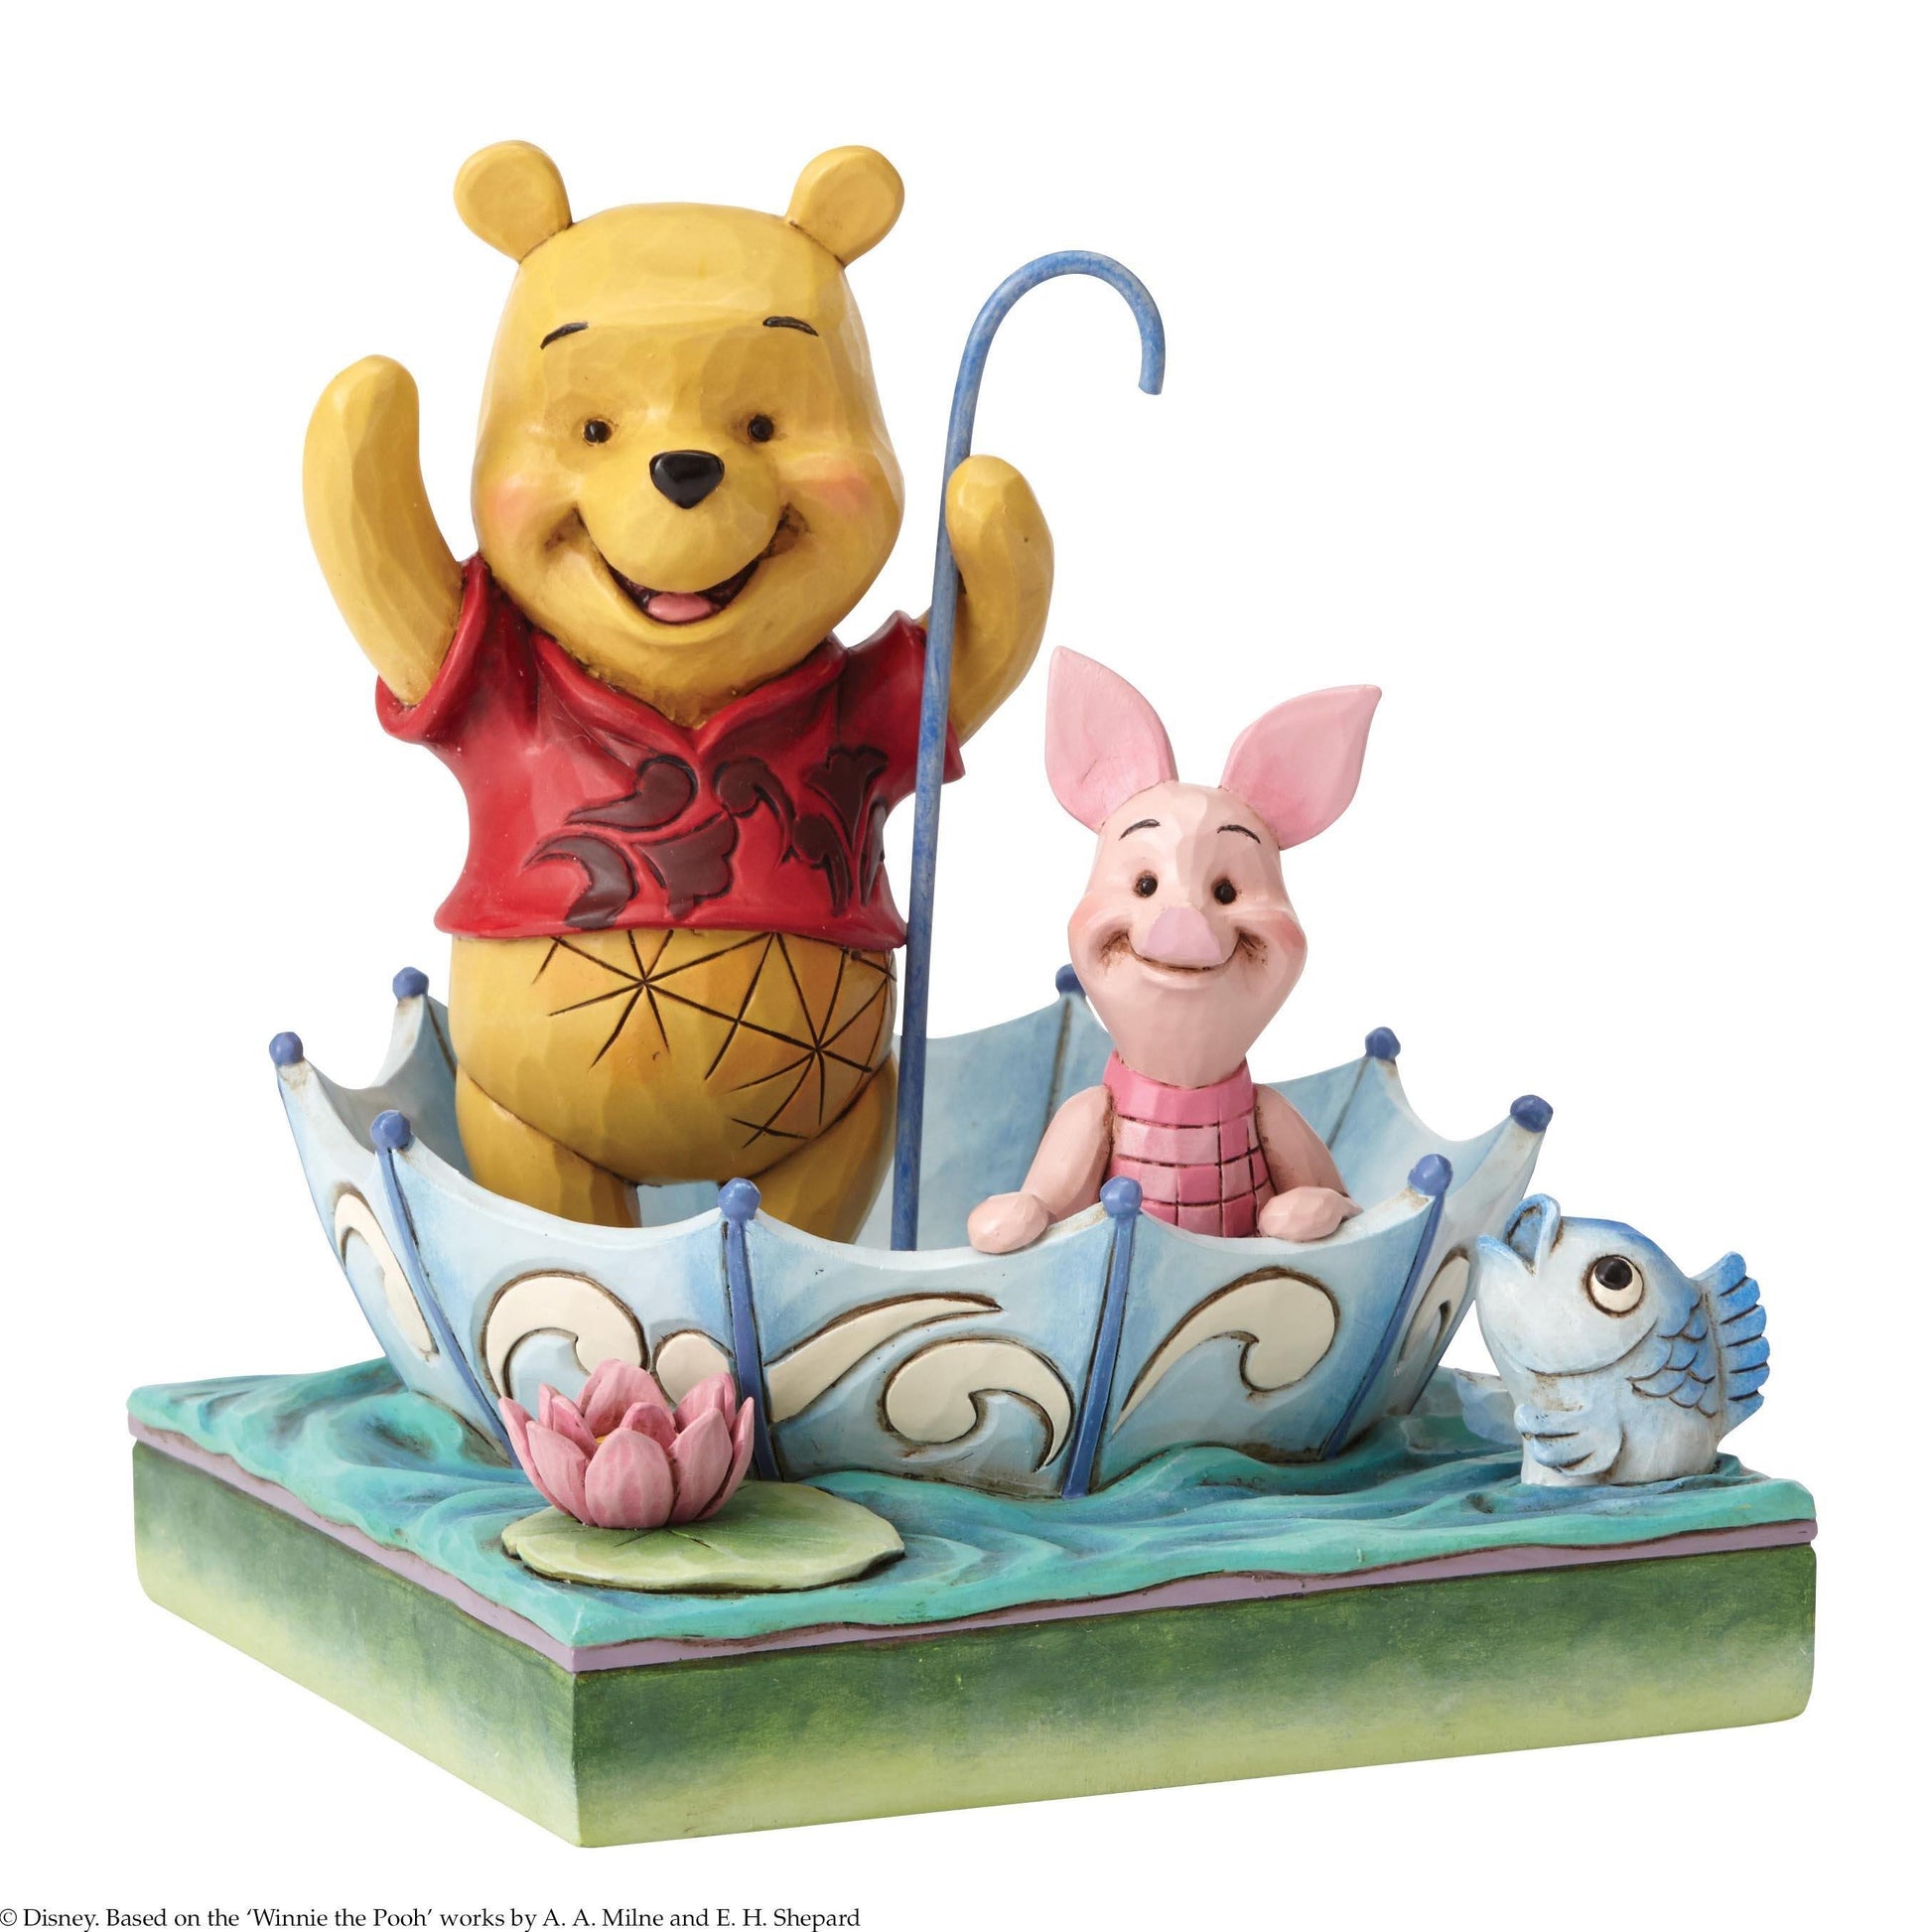 50 Years of Friendship (Winnie the Pooh and Piglet Figurine) (Disney Traditions by Jim Shore) - Gallery Gifts Online 